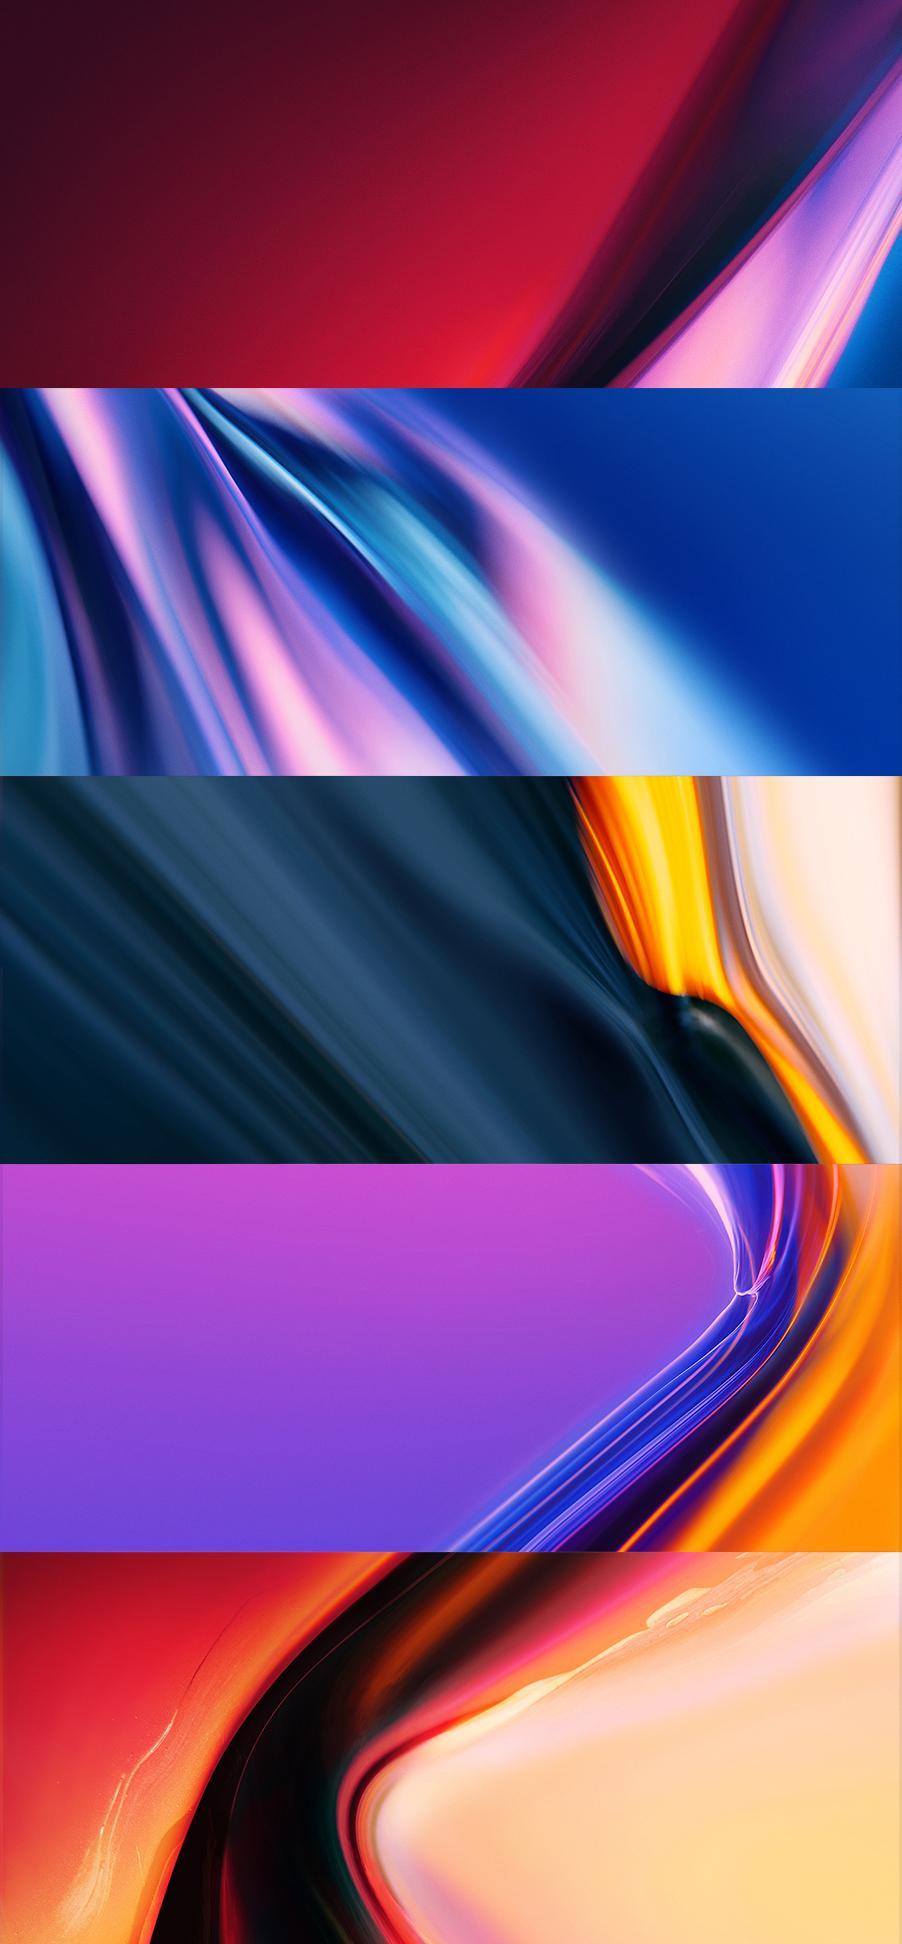 Download OnePlus 7 and 7 Pro Stock Wallpaper [4K resolution]